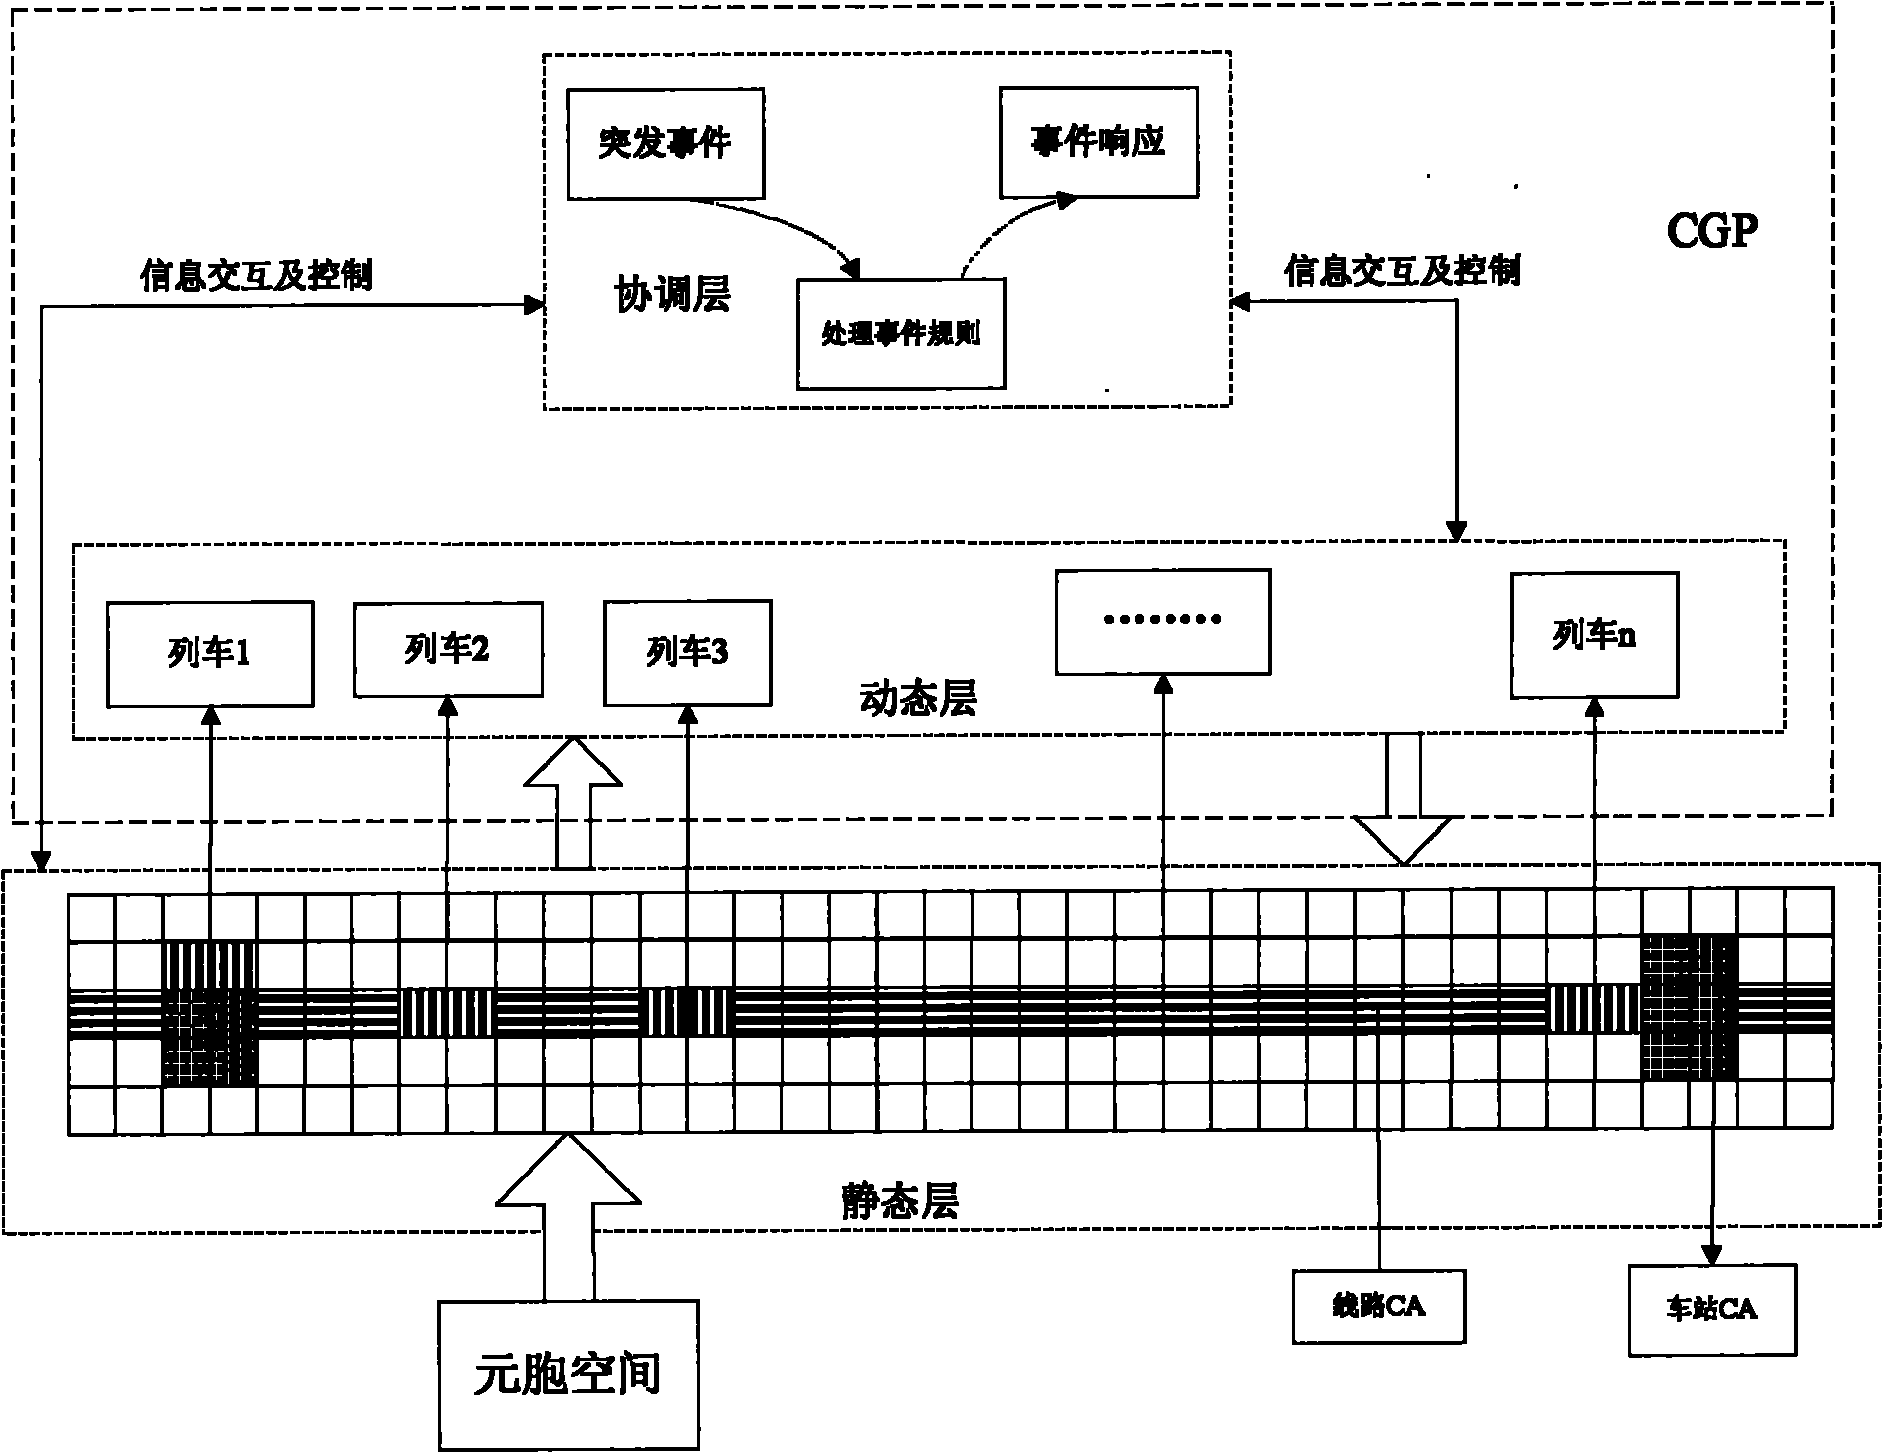 Method using intelligent hybrid model to describe operational process of high-speed train group